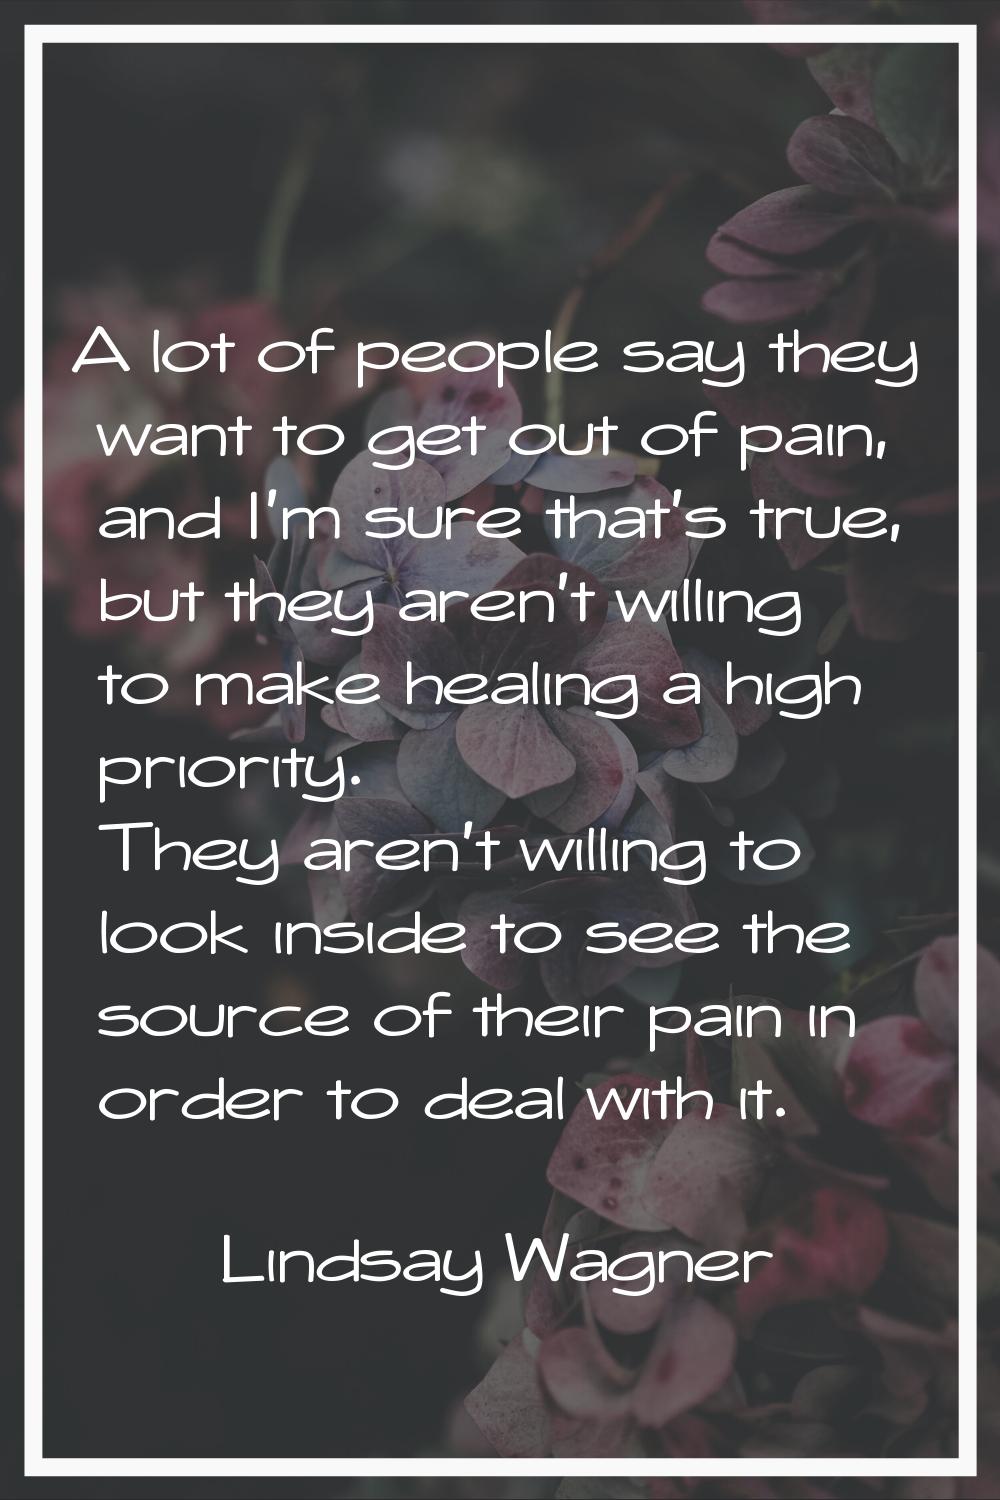 A lot of people say they want to get out of pain, and I'm sure that's true, but they aren't willing